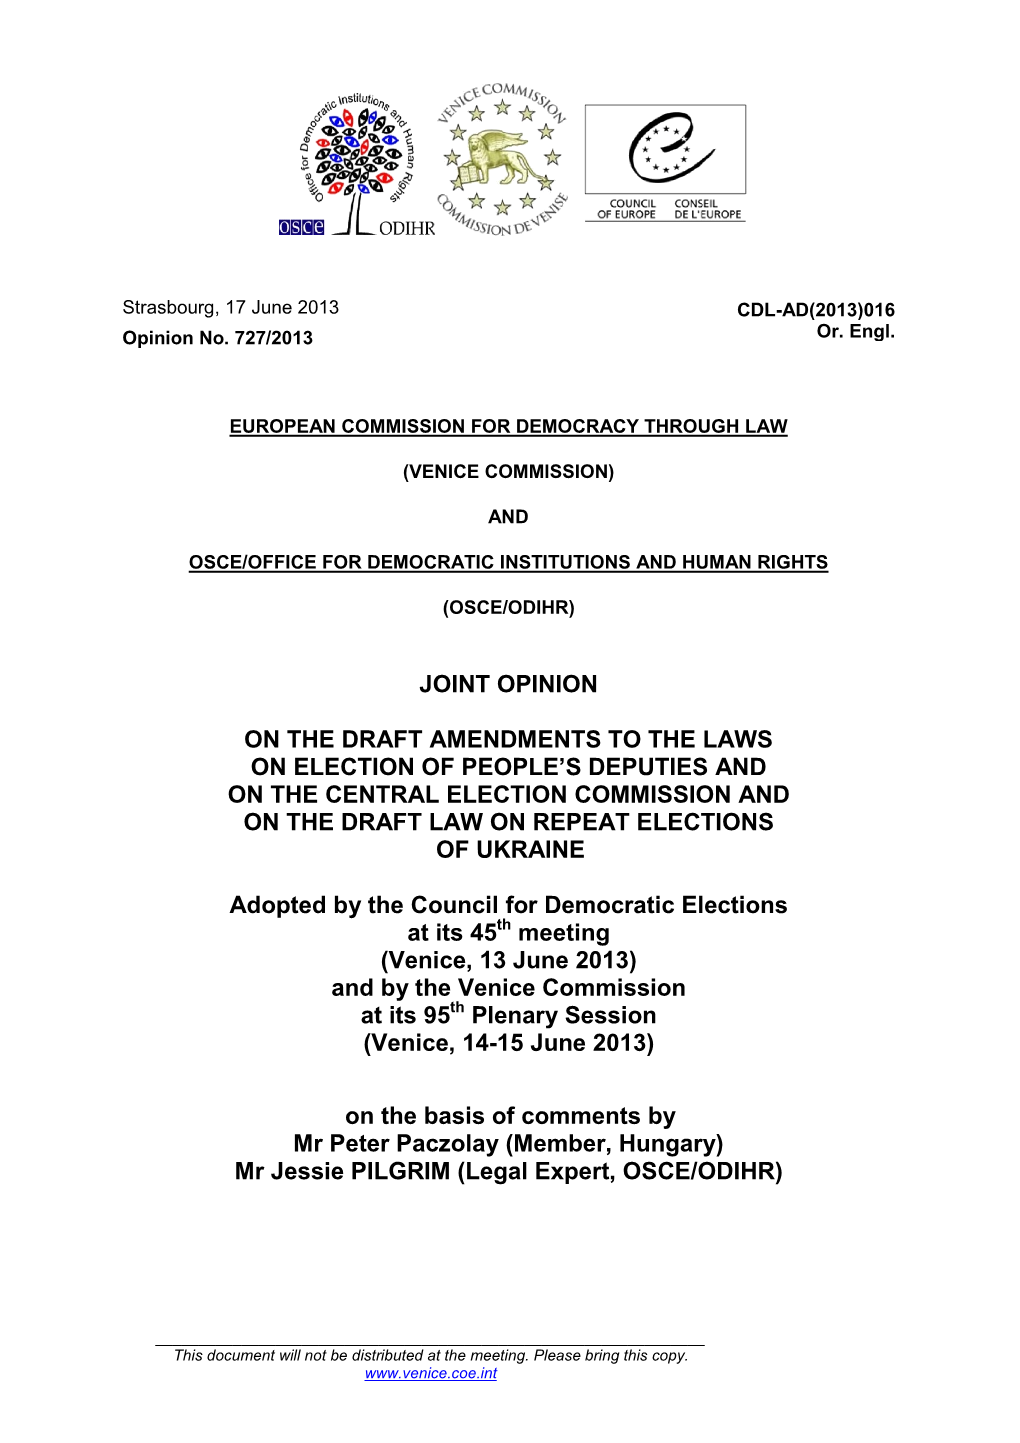 Joint Opinion on the Draft Amendments to The